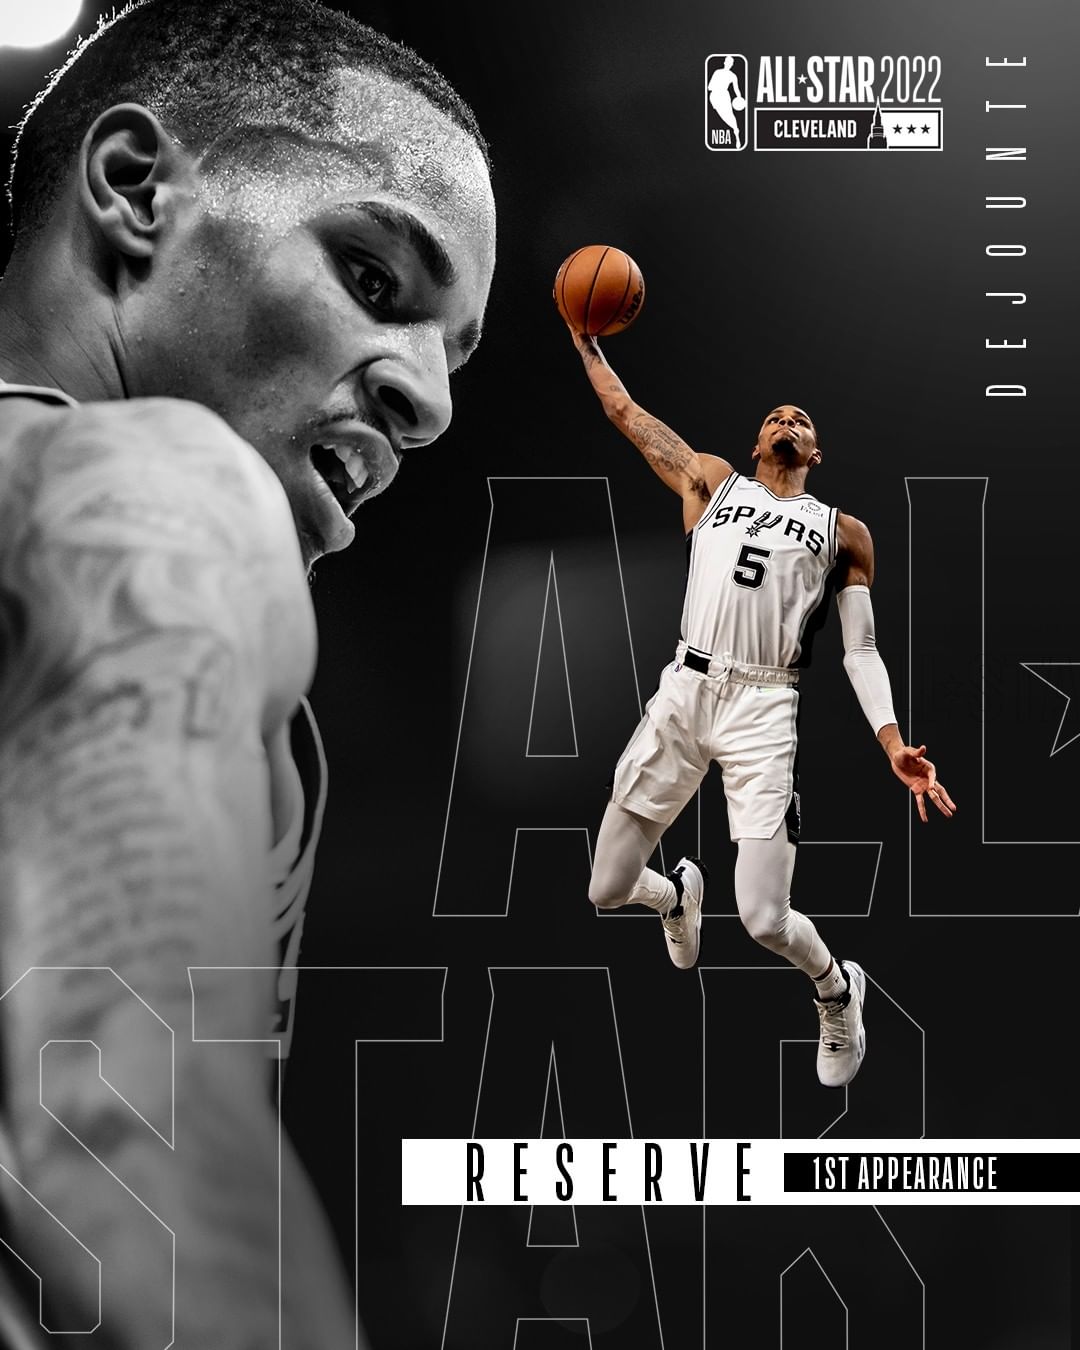 OFFICIAL: @dejountemurray has been selected to the 2022 #NBAAllStar game!  Cong...